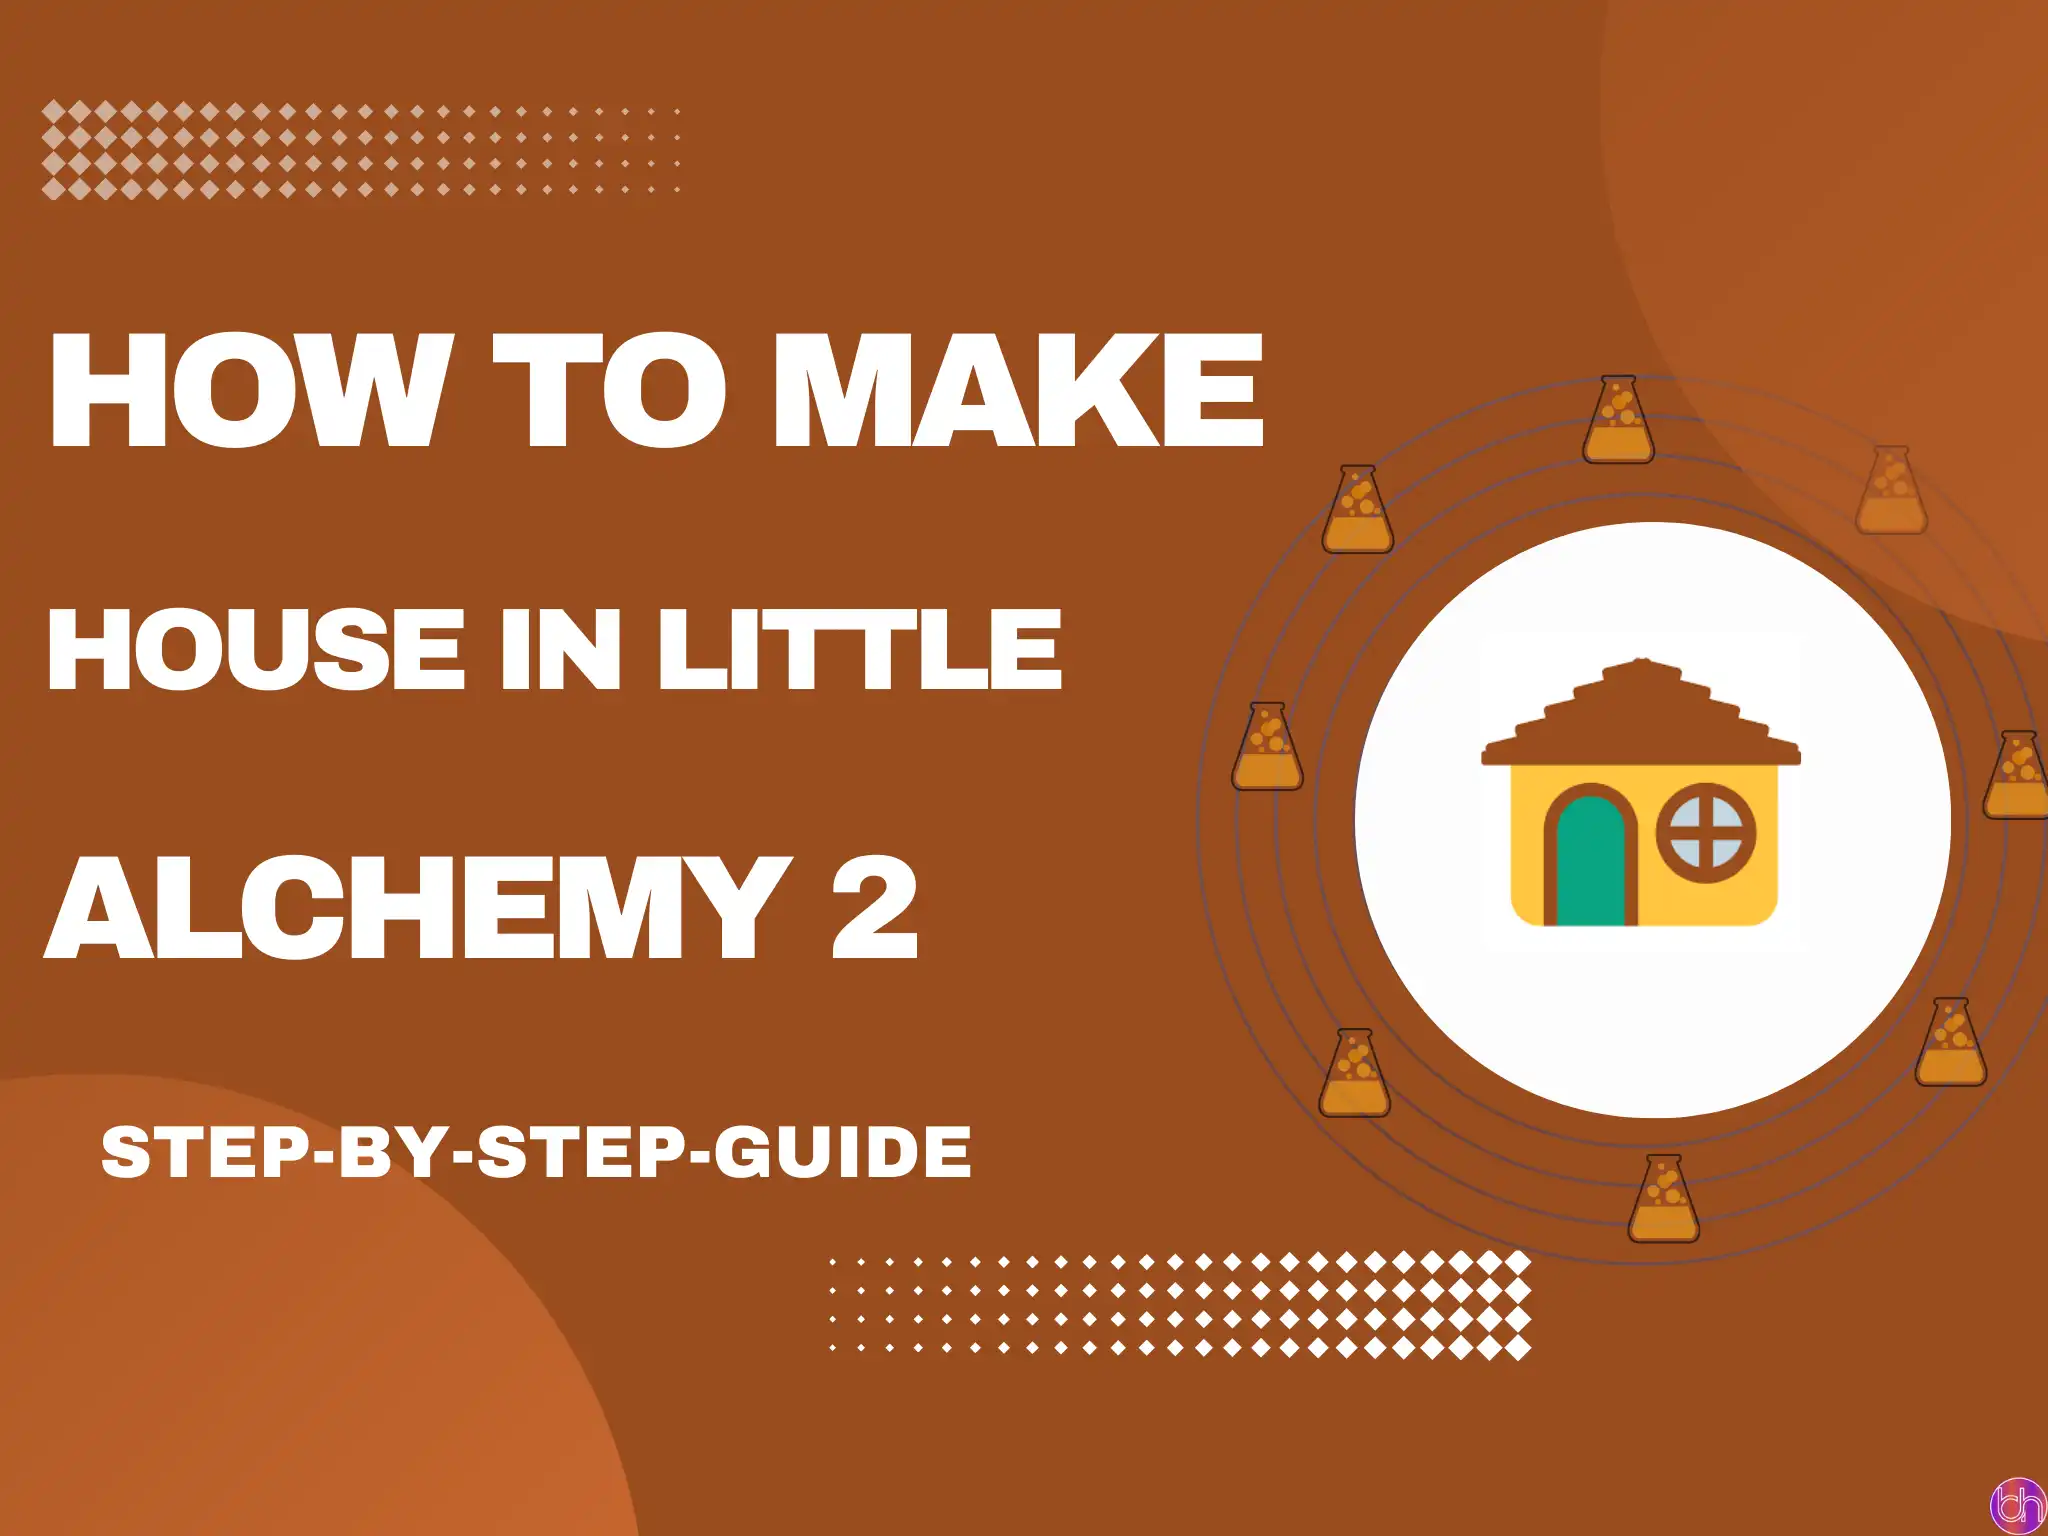 How to make House in little alchemy 2